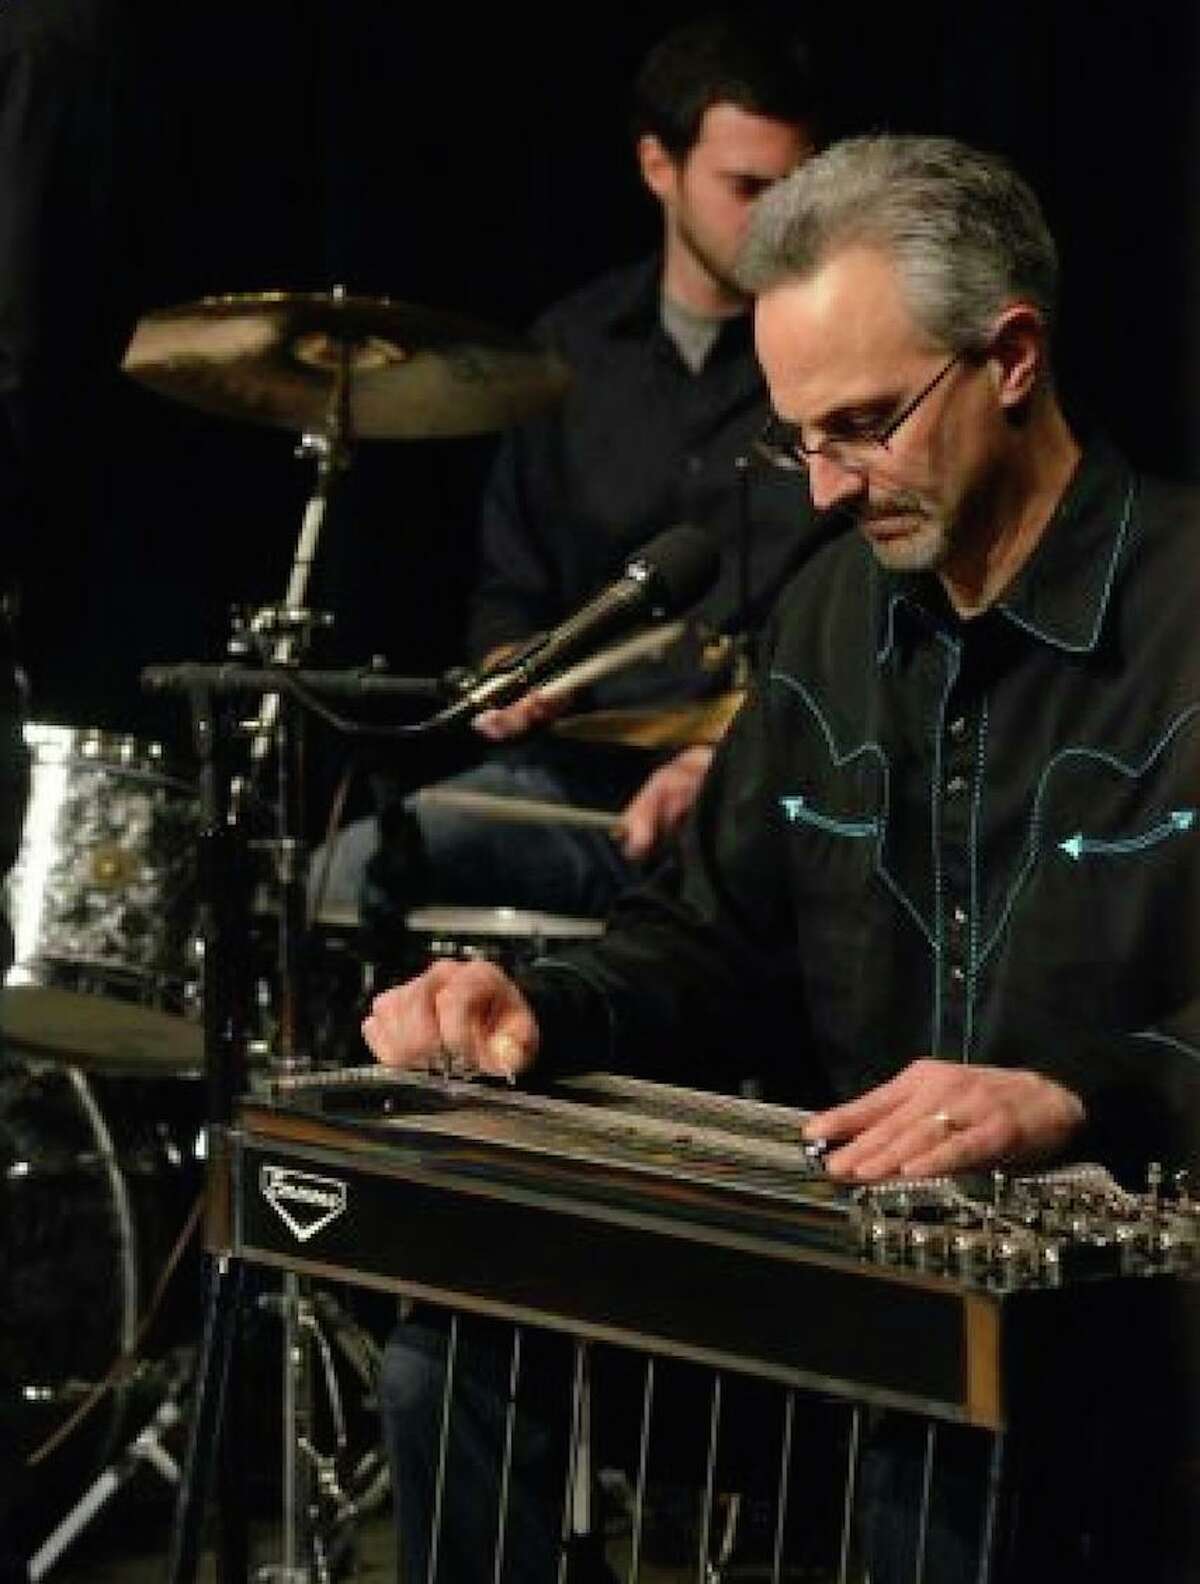 Jeff DeMaio, pedal steel guitar player for Gunsmoke and a Darien resident, is coordinator of the Steel Guitar Celebration coming to Norwalk on Nov. 10.